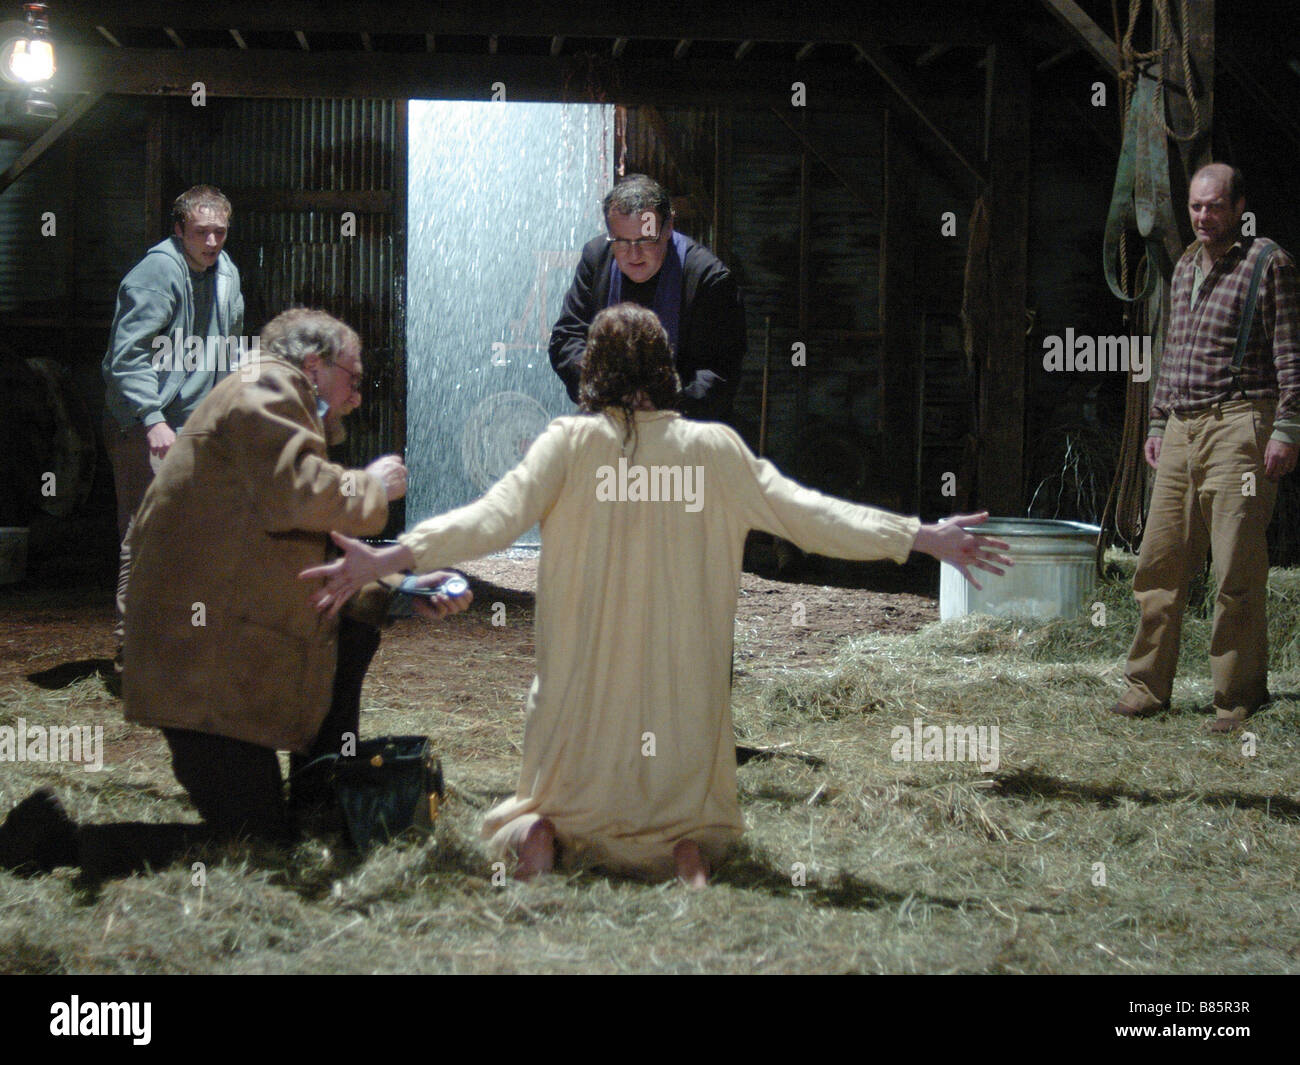 Page 2 - The Exorcism High Resolution Stock Photography and Images - Alamy